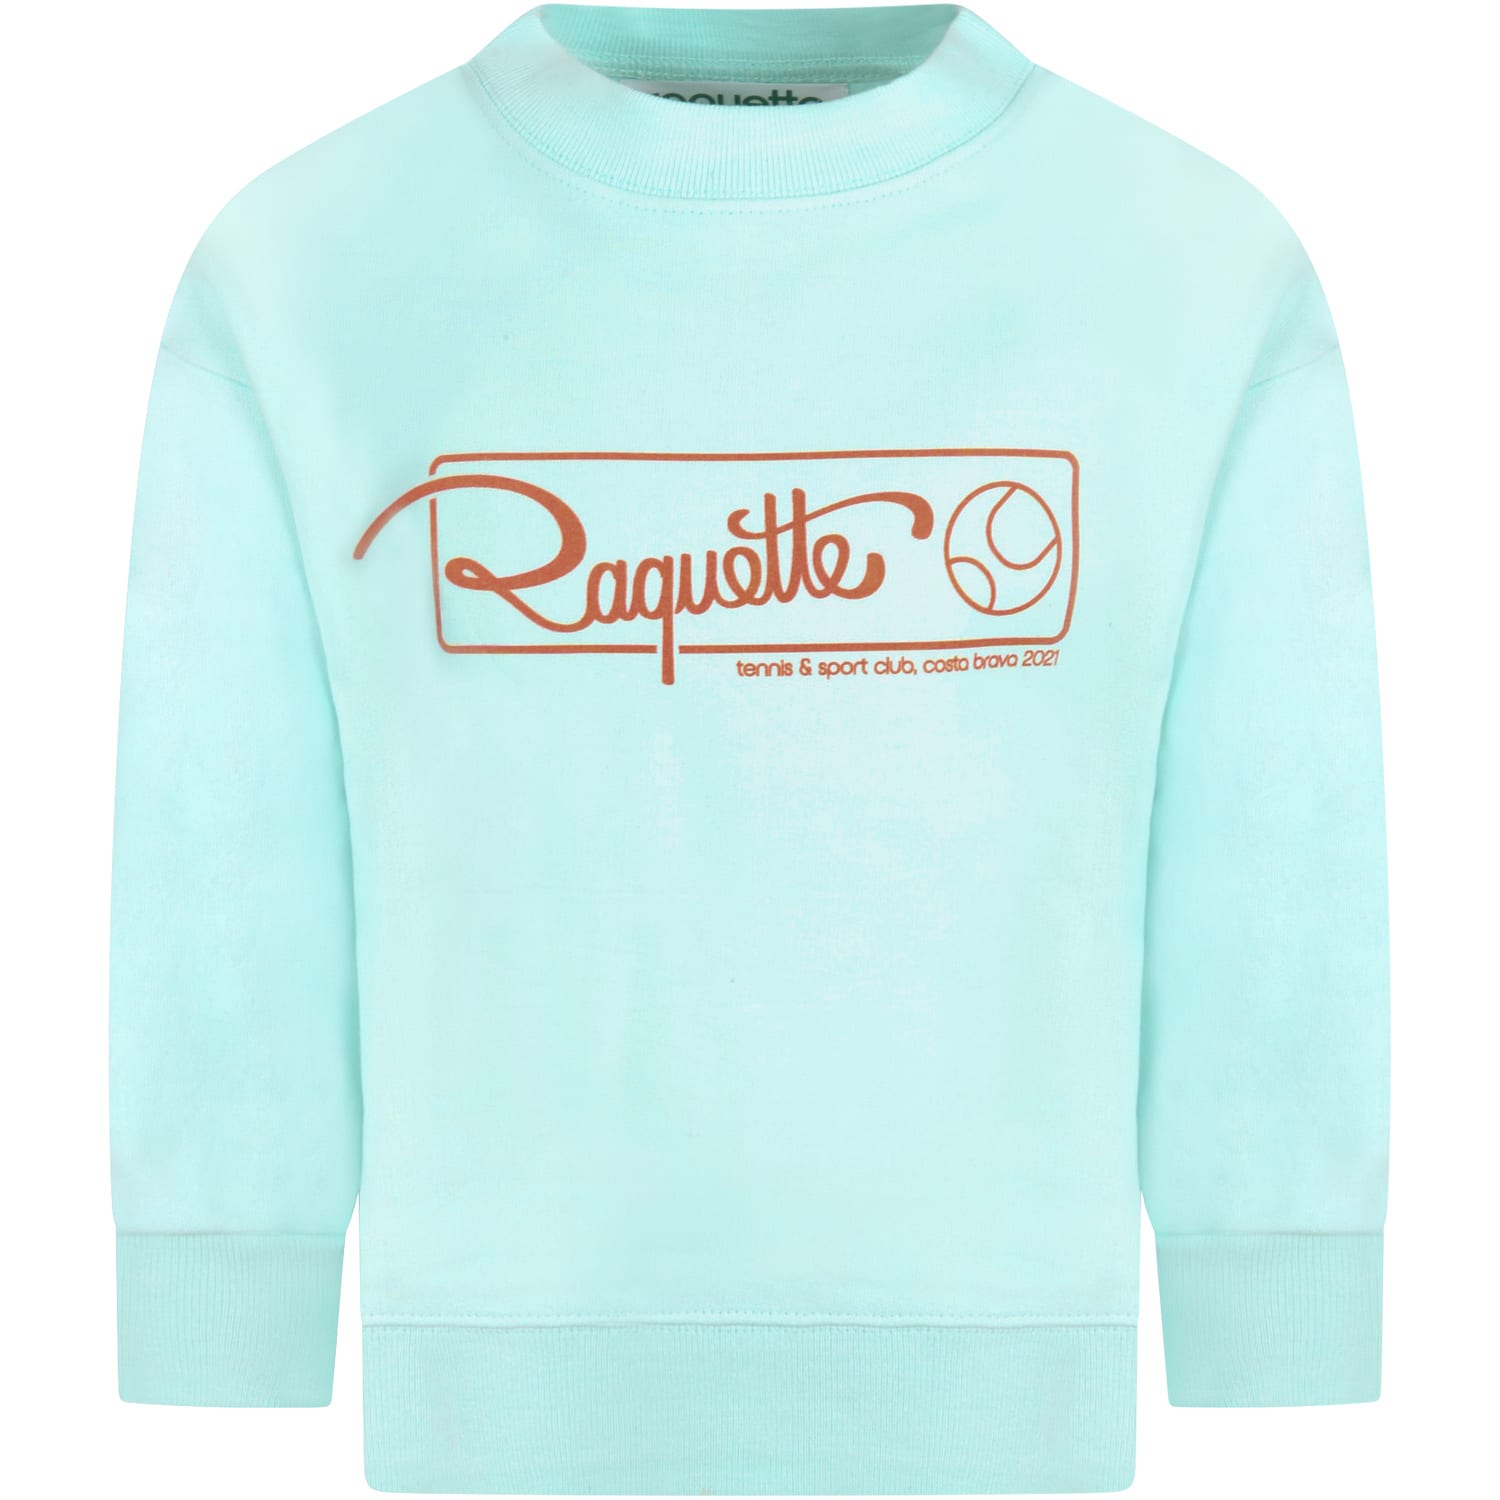 Raquette Teal Sweatshirt For Kids With Logo